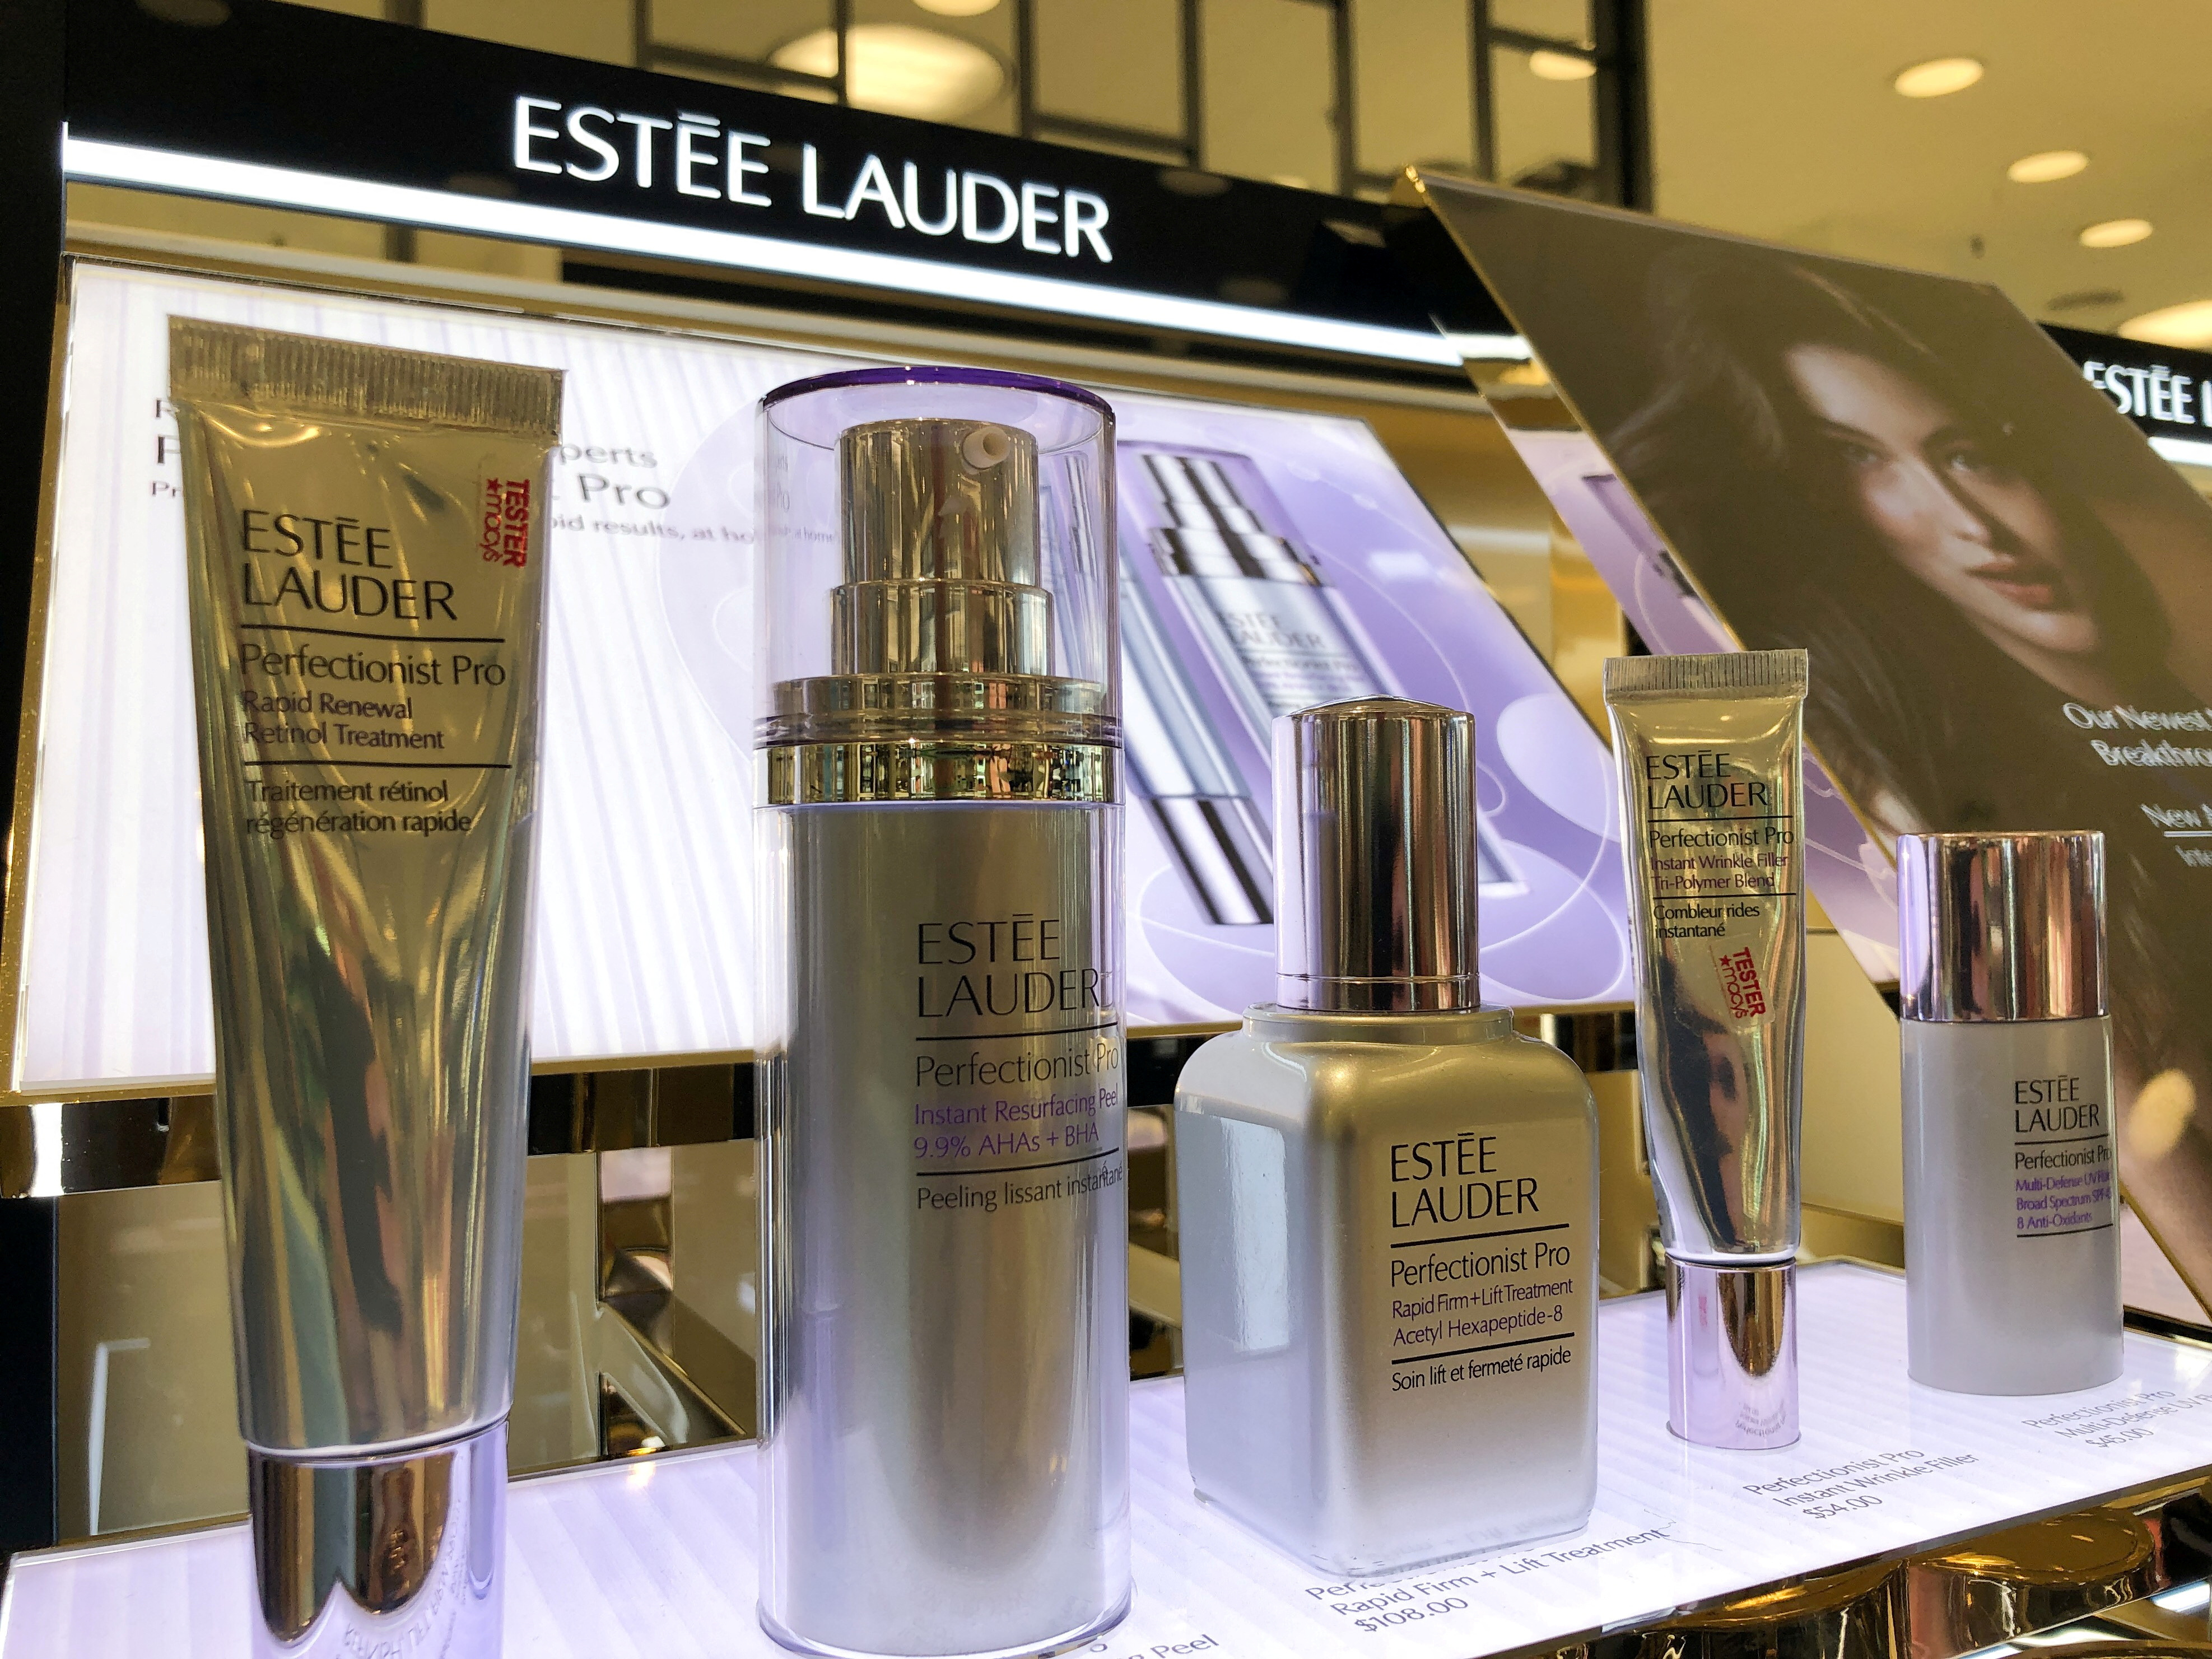 Estee Lauder sinks after dour 2023 outlook due to slow recovery in Asia